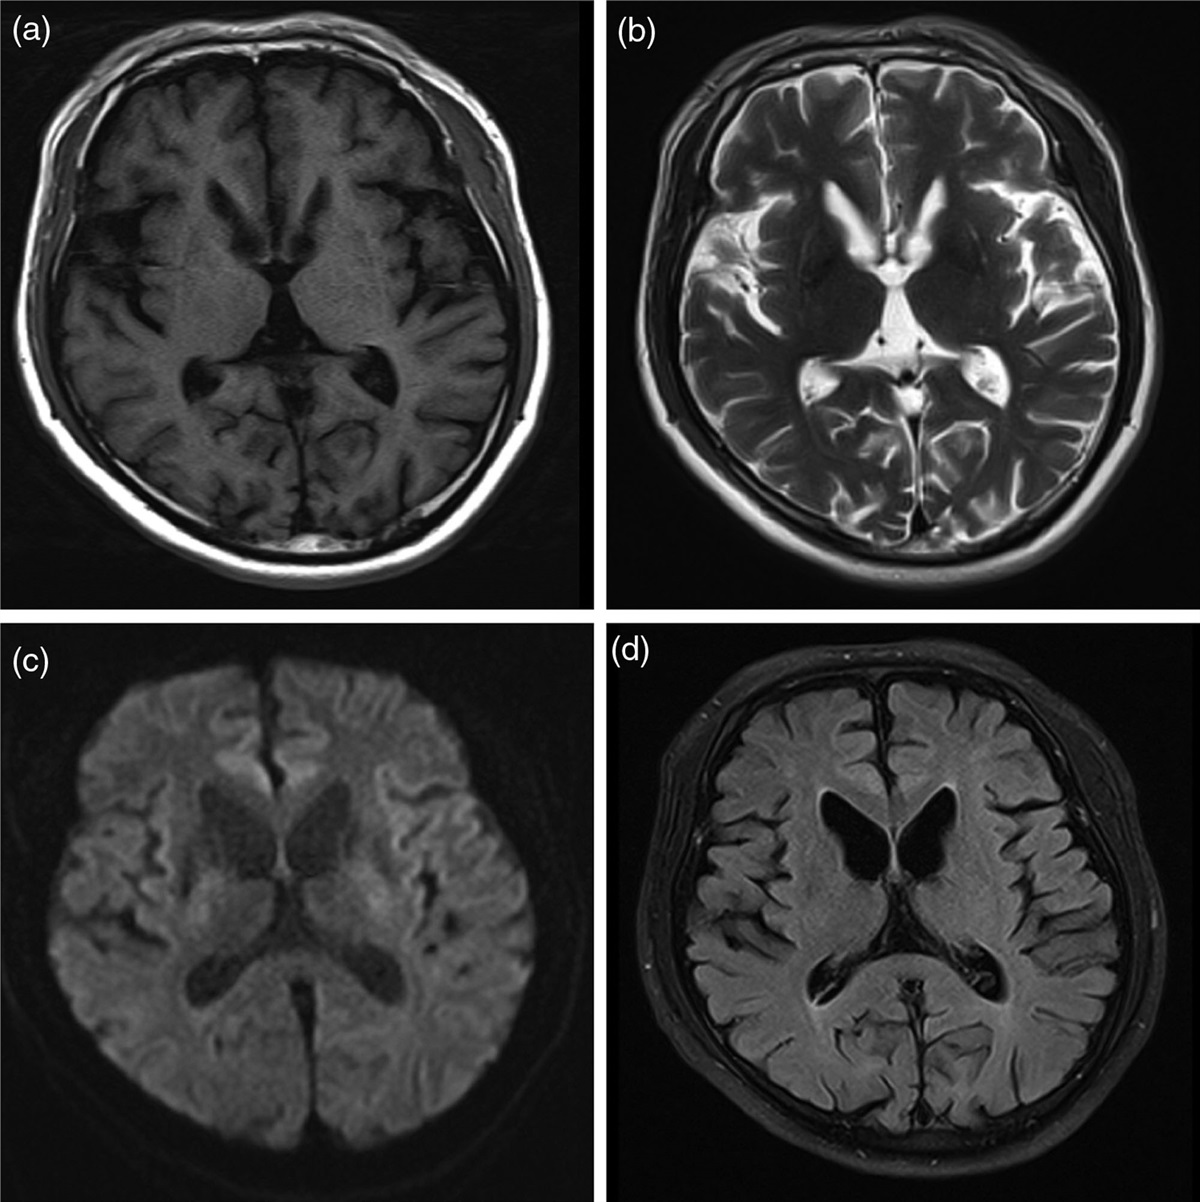 A rare case report of Huntington’s disease with severe psychiatric symptoms as initial manifestations